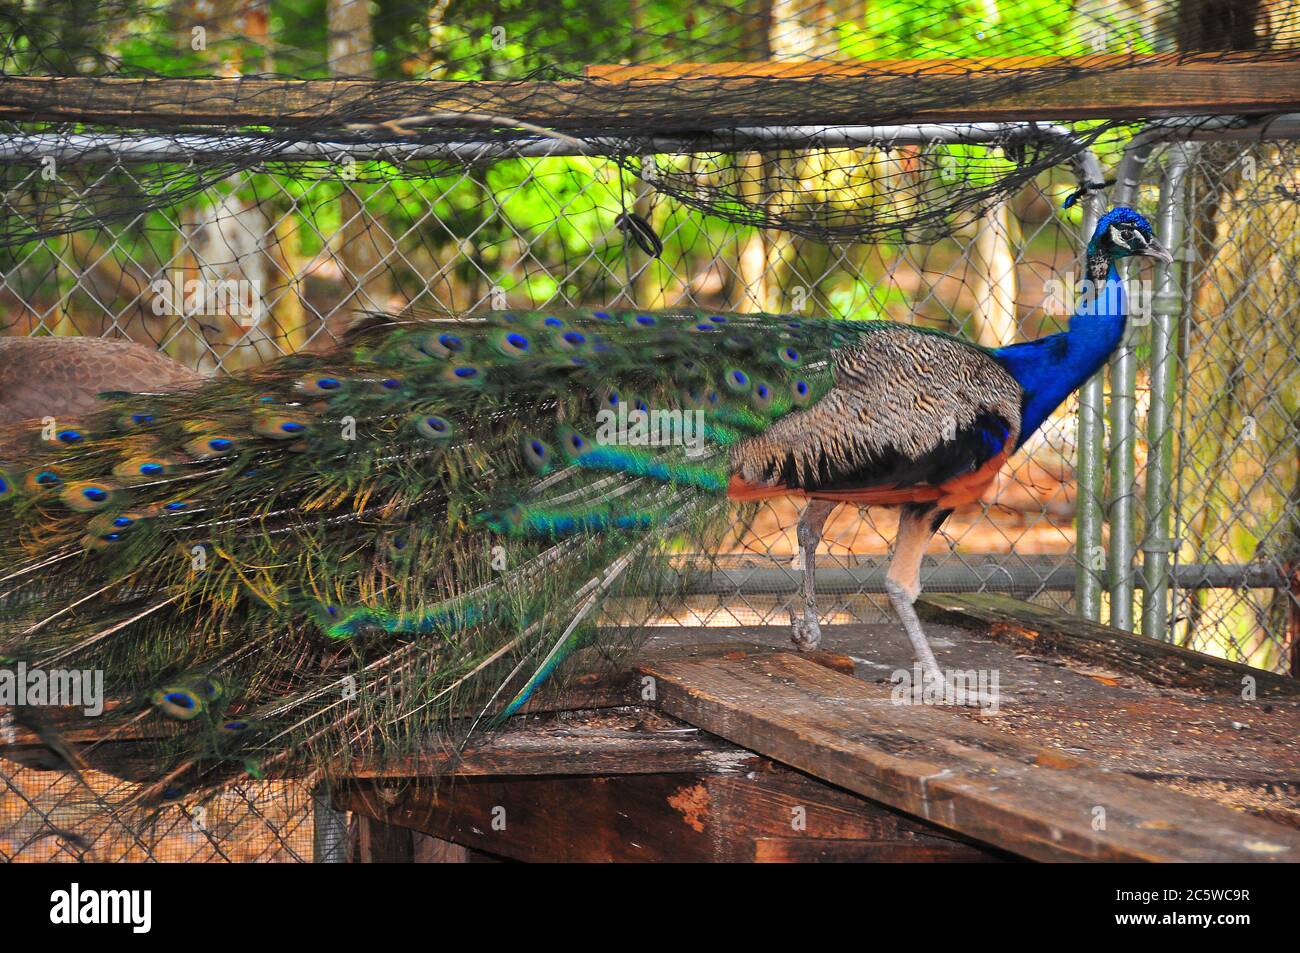 A proud and beautiful peacock strolls around the farm pen displaying its plumage. Stock Photo